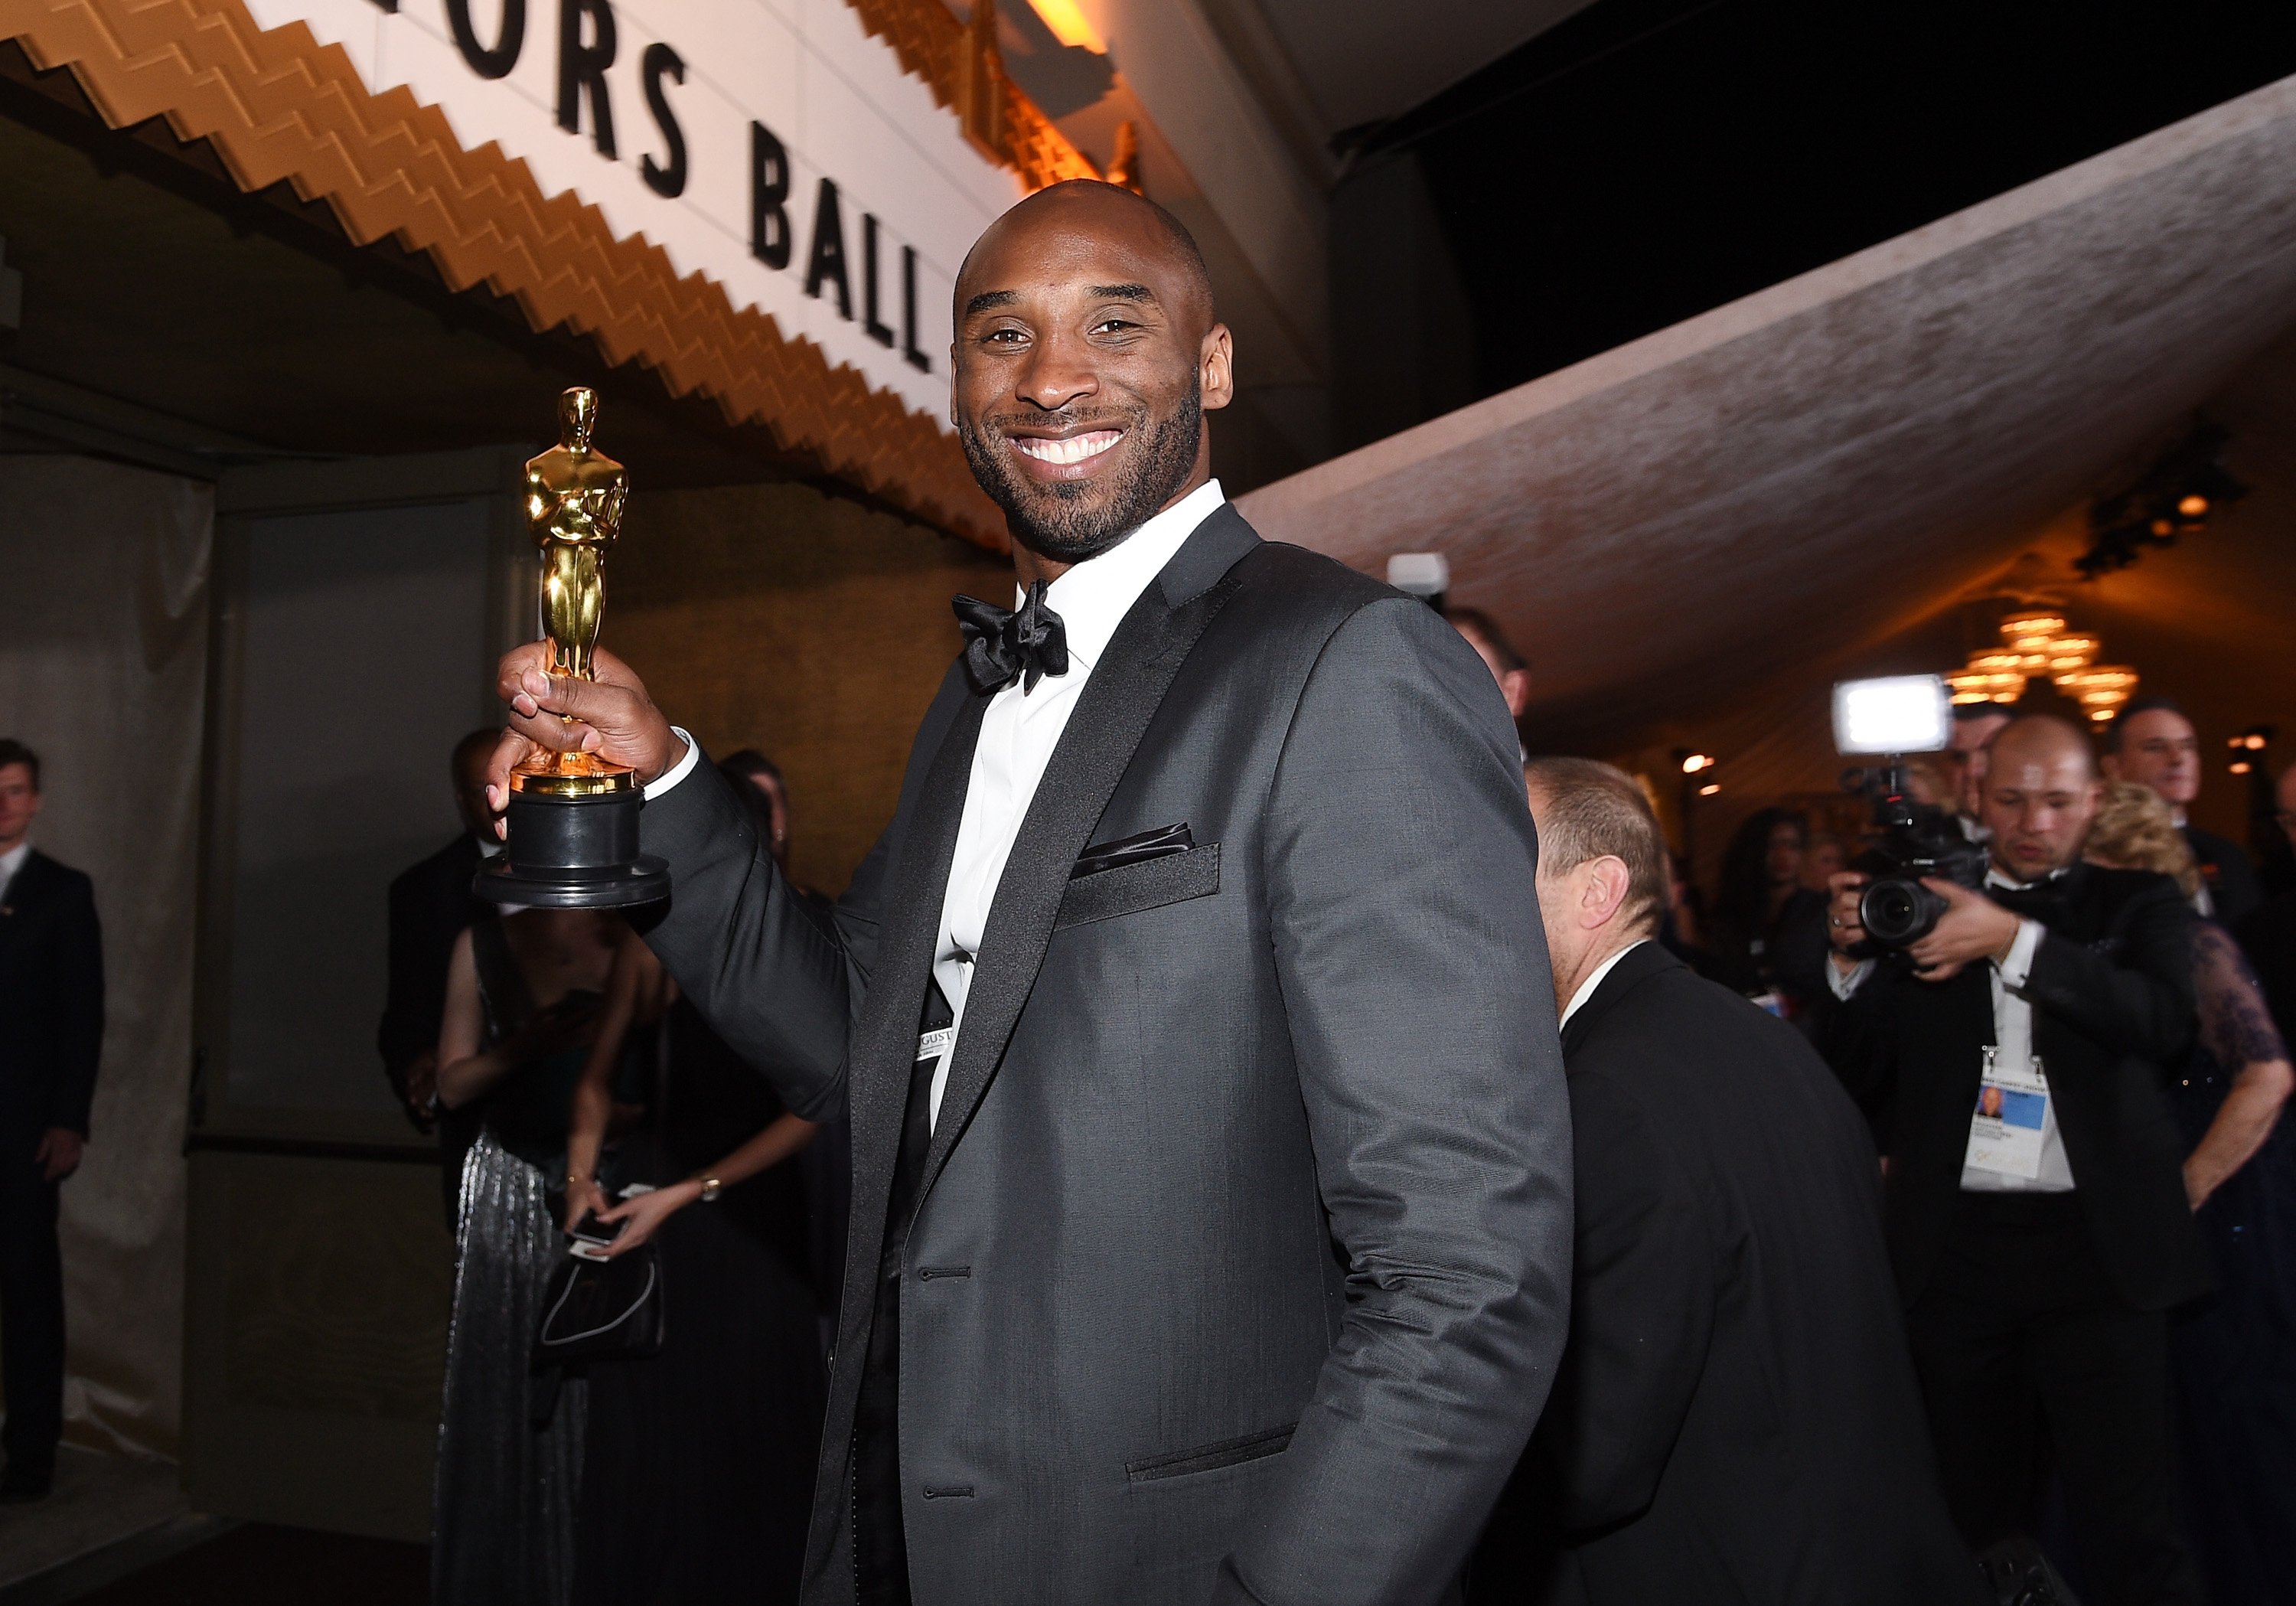 Kobe Bryant attends the 90th Annual Academy Awards Governors Ball at Hollywood & Highland Center on March 4, 2018 | Photo: GettyImages